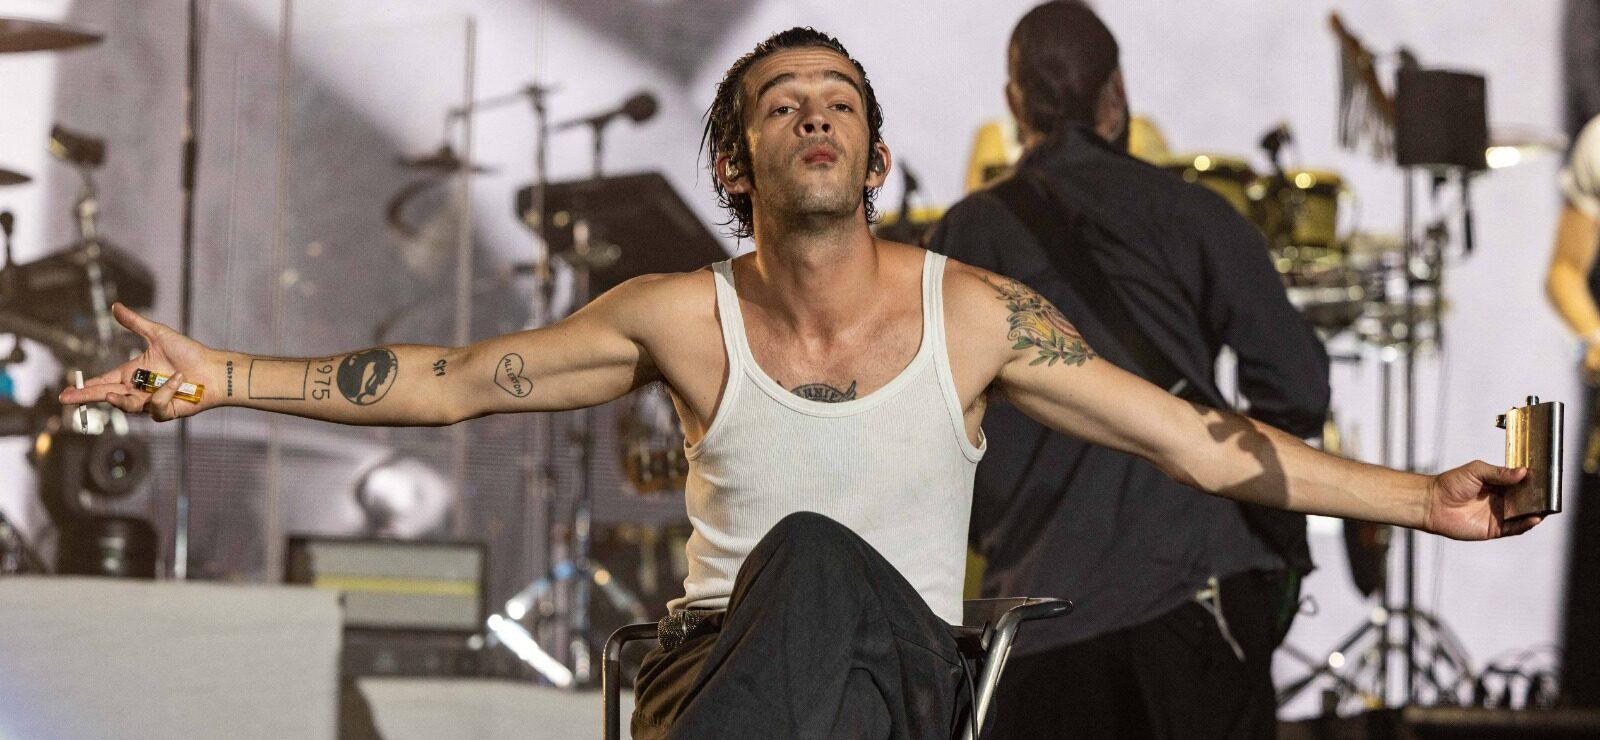 Matty Healy's Anti-LGBT Law Protest In Malaysia Might Cost The 1975 $2.7 Million